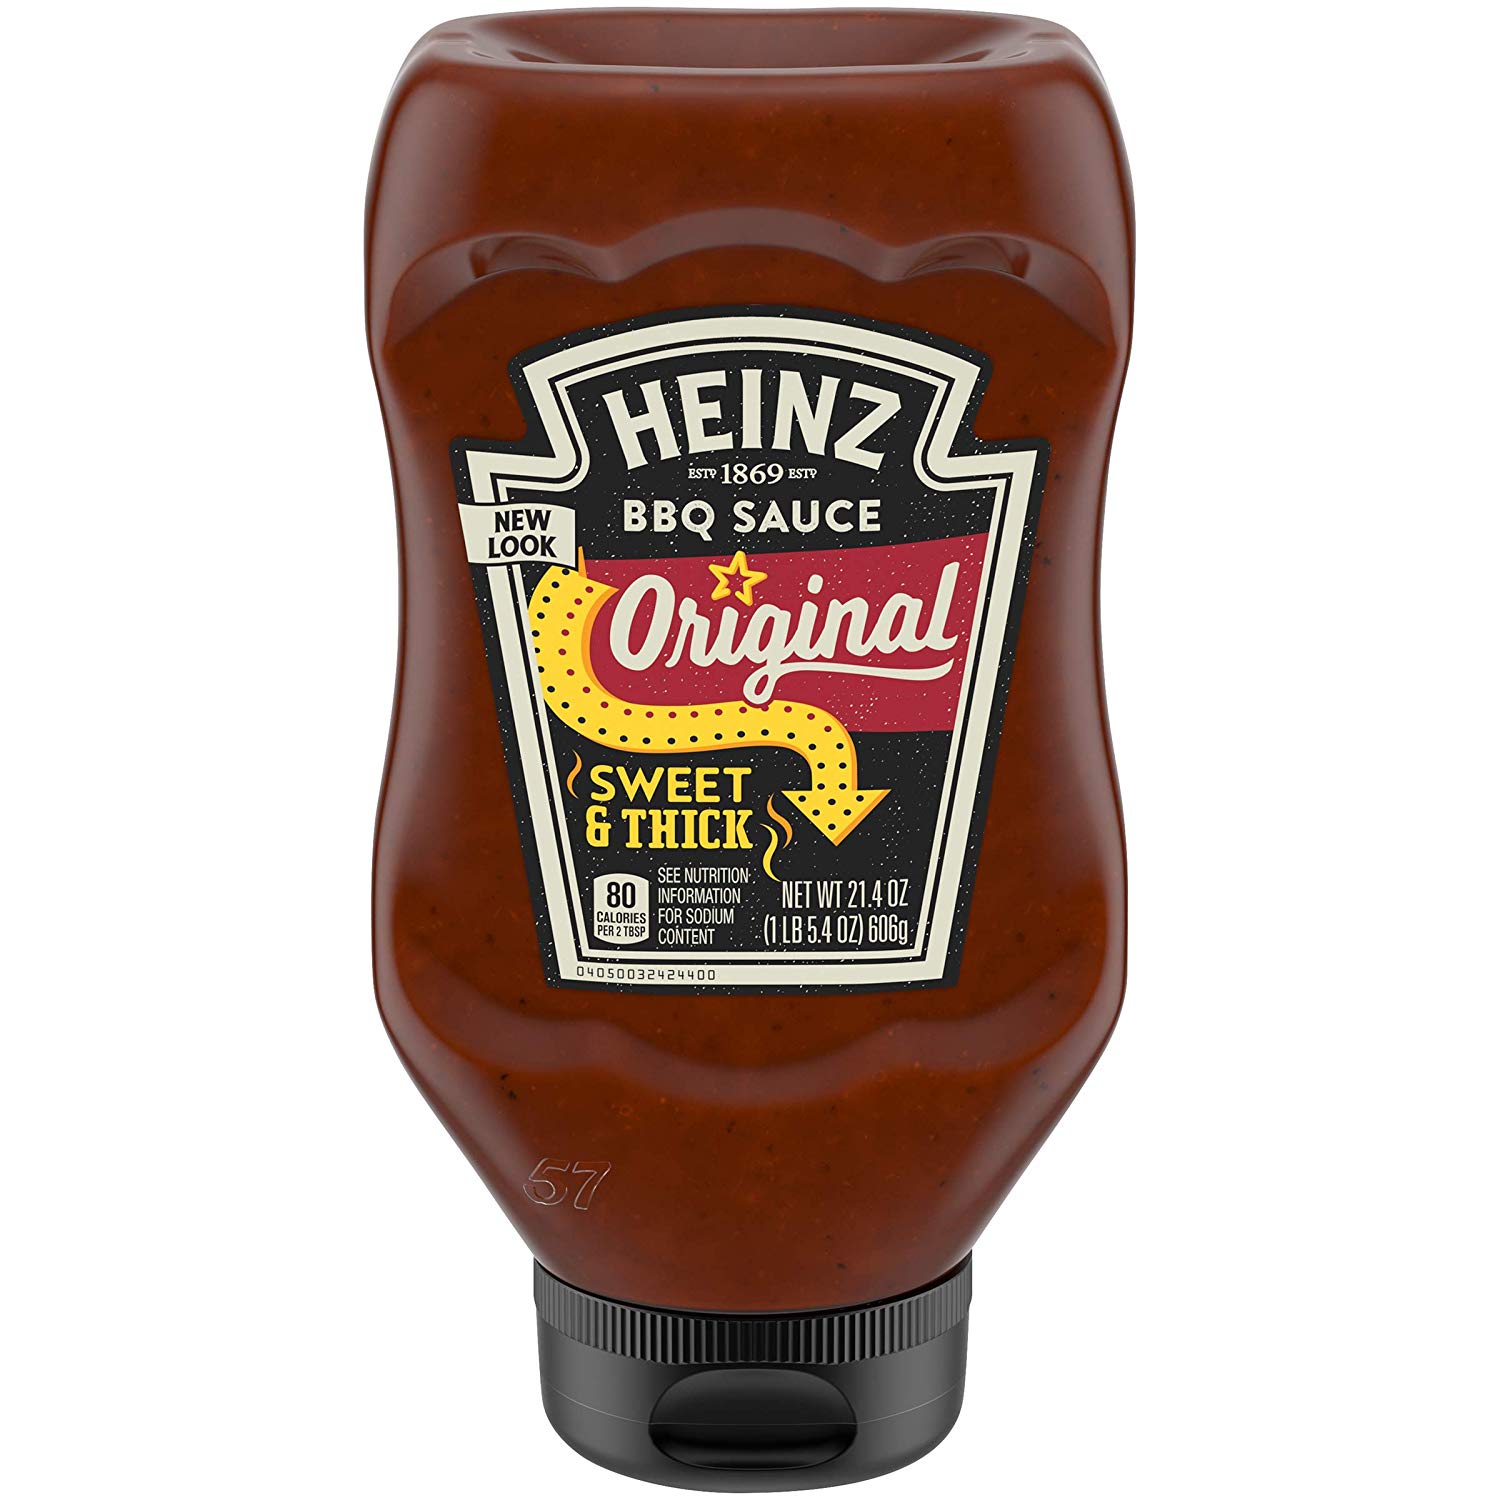 Heinz Sweet & Thick Classic Style BBQ Sauce (21.4 oz Bottles, Pack of 6) - image 1 of 2